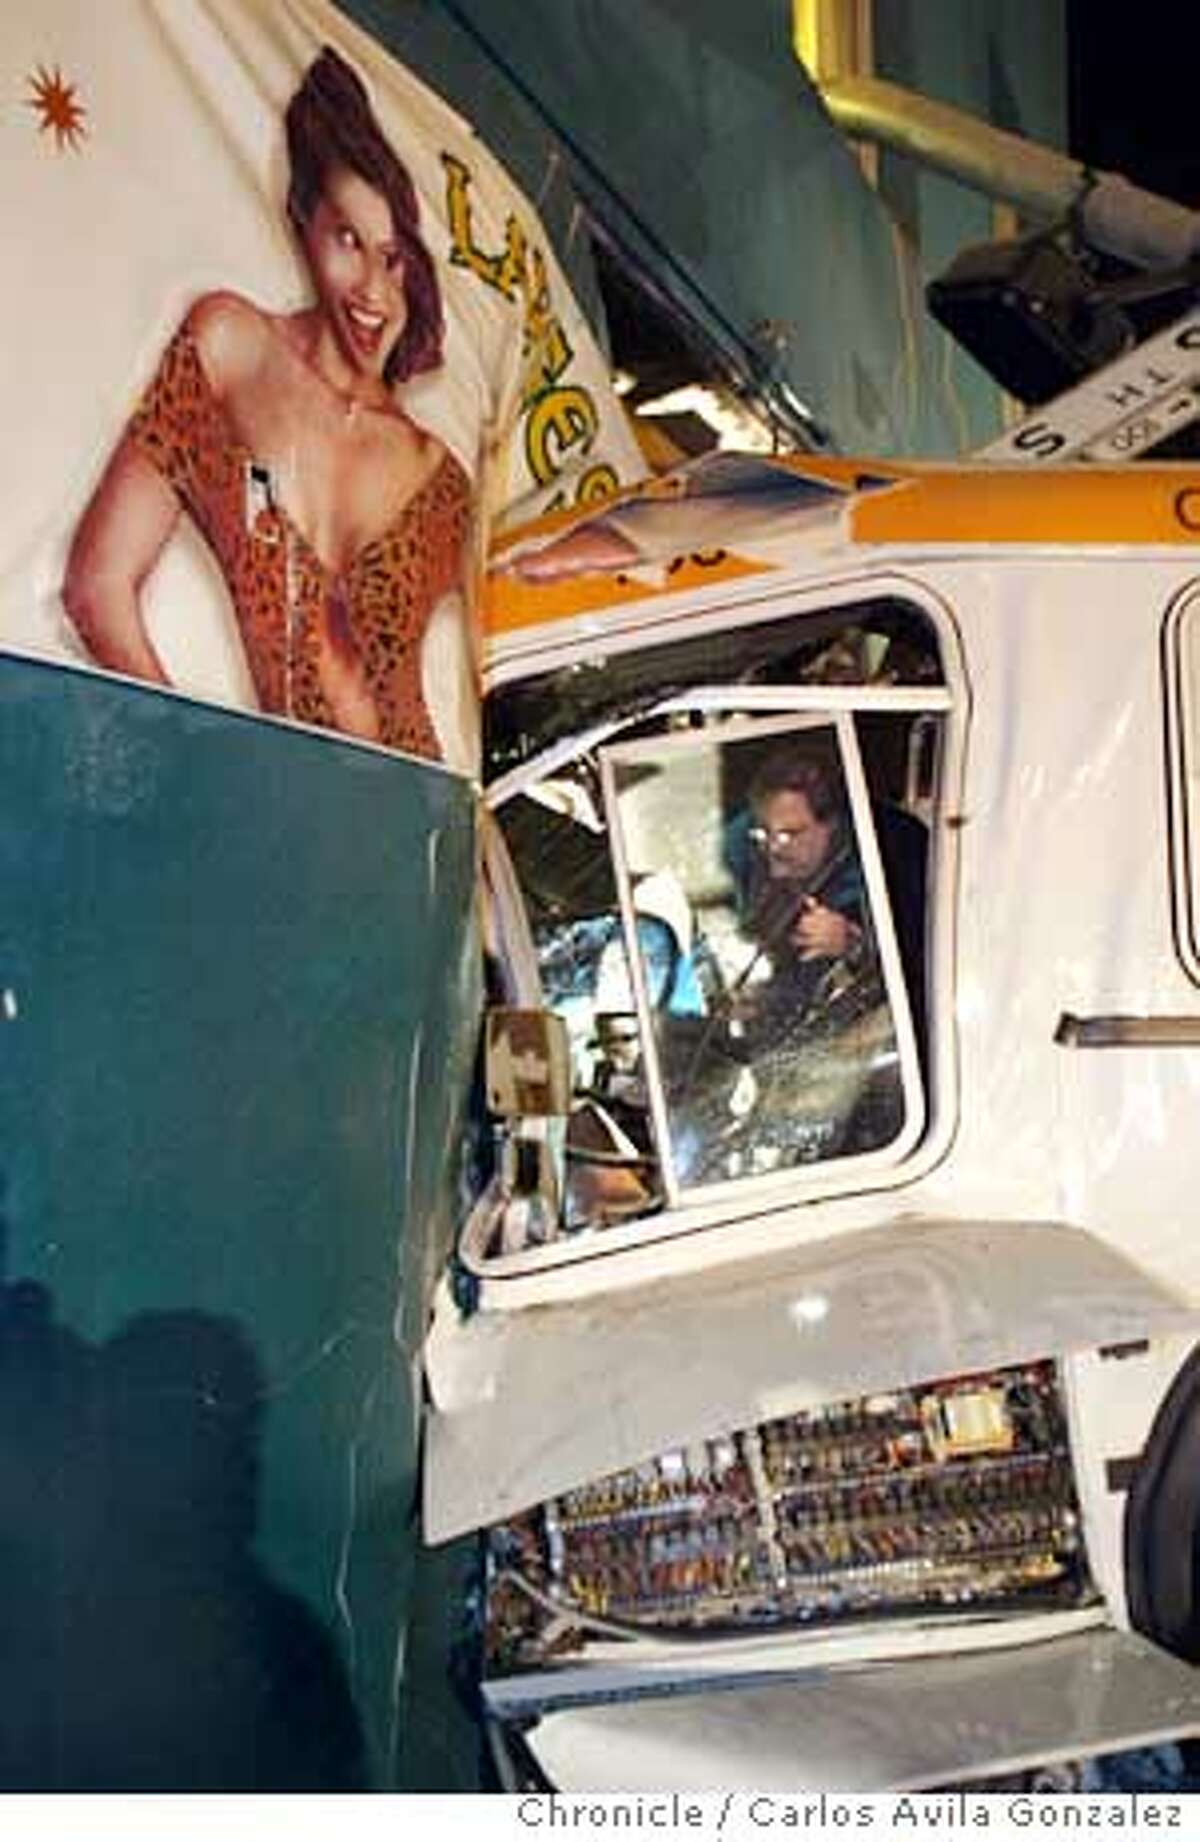 A muni bus drove into an adult bookstore on the corner of Mission and Sixth Street, causing some injuries but no deaths, Monday, Dec. 15, 2003. Chronicle Photo - Carlos Gonzalez